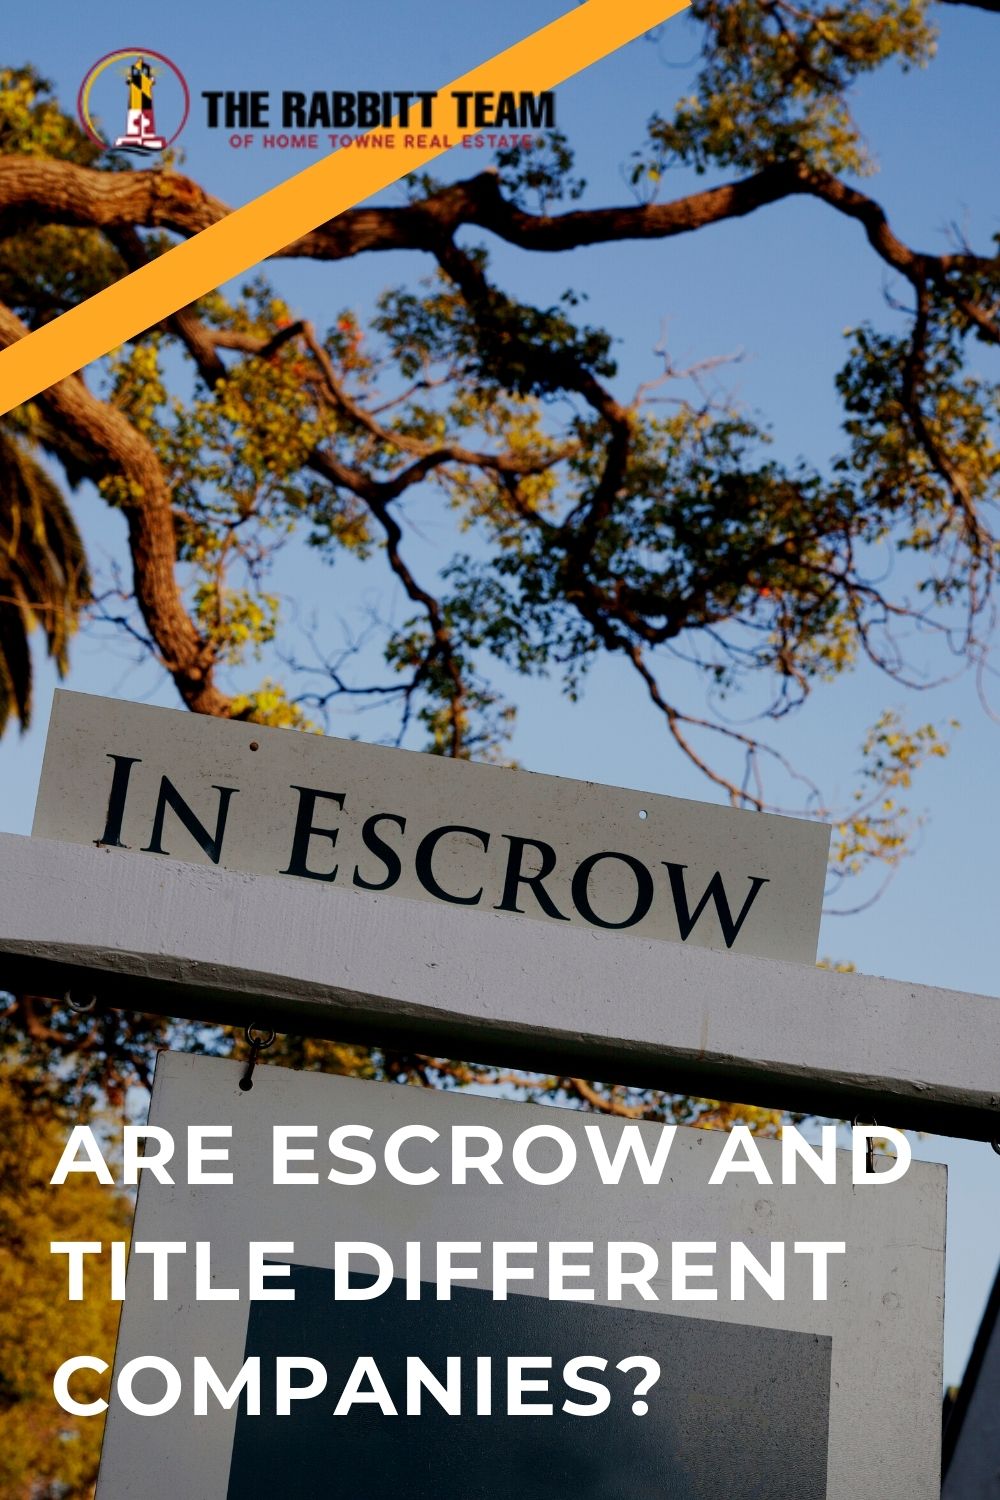 Are Escrow and Title Different Companies